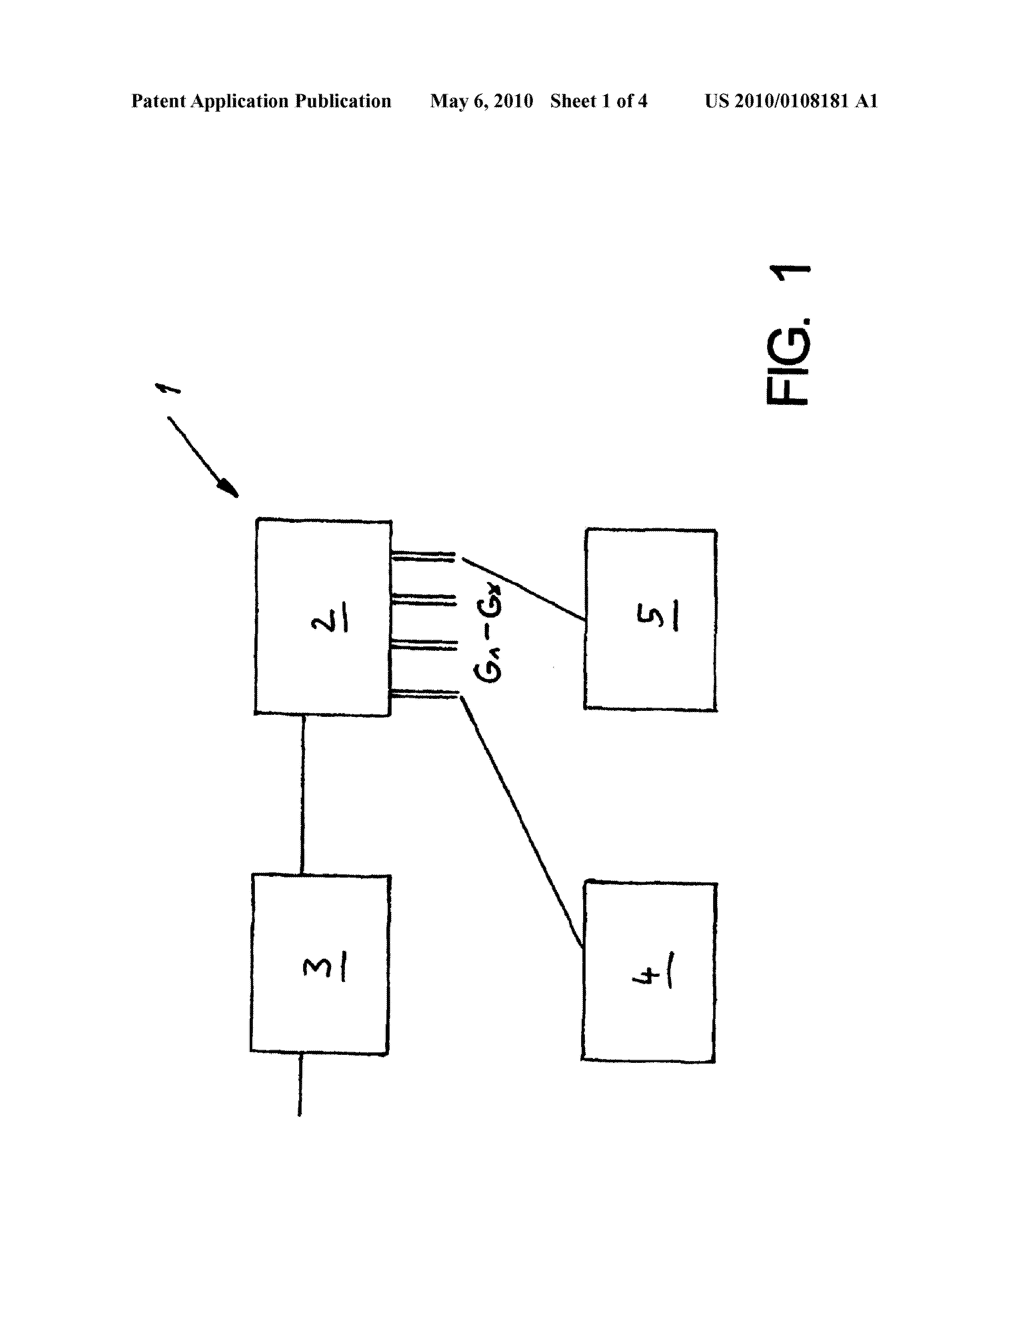 METHOD OF FILLING BEVERAGE BOTTLES WITH A LIQUID BEVERAGE AND CAPPING FILLED BEVERAGE BOTTLES WITH CROWN CAPS IN A BEVERAGE BOTTLING PLANT, A METHOD OF HANDLING CONTAINERS IN A CONTAINER HANDLING PLANT, AND ARRANGEMENTS THEREFOR - diagram, schematic, and image 02